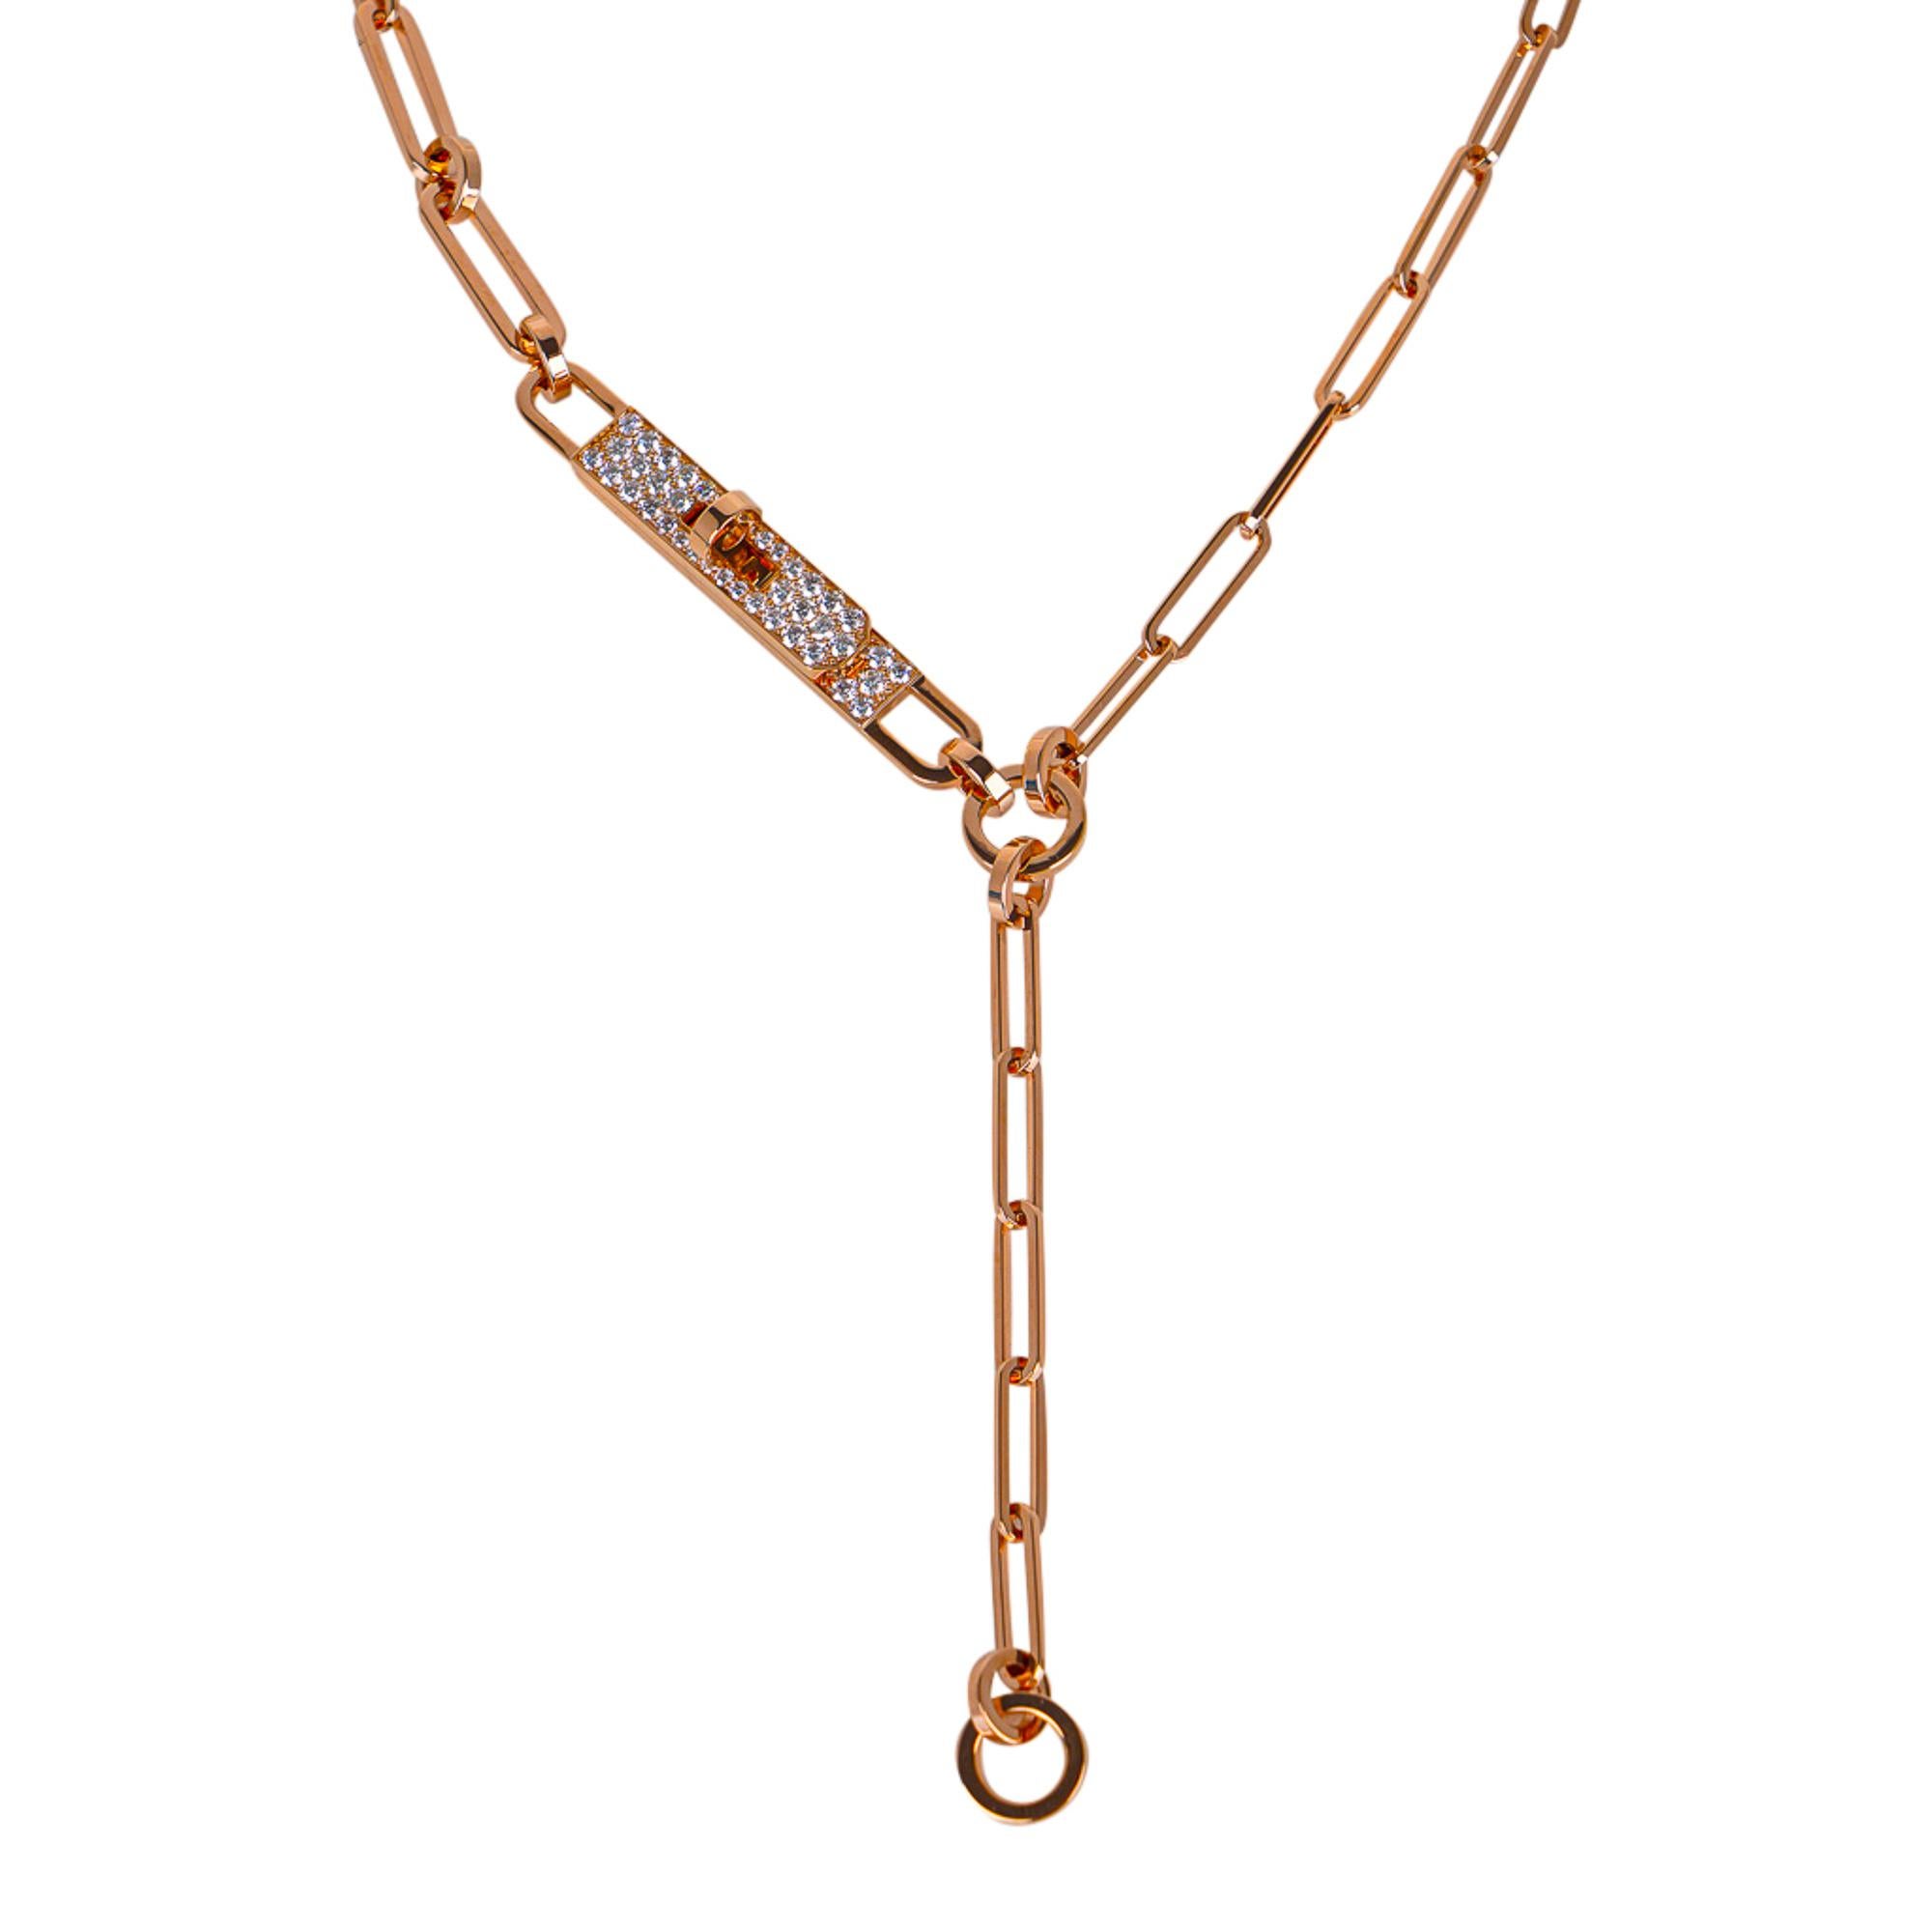 Mightychic offers an Hermes Kelly Chaine Lariat Necklace.
Featured in 18K Rose Gold and a diamond Kelly lock clasp in the small model.
Set with 41 diamonds totaling .62 carat weight.
The rectangular links are accentuated with interspersed small